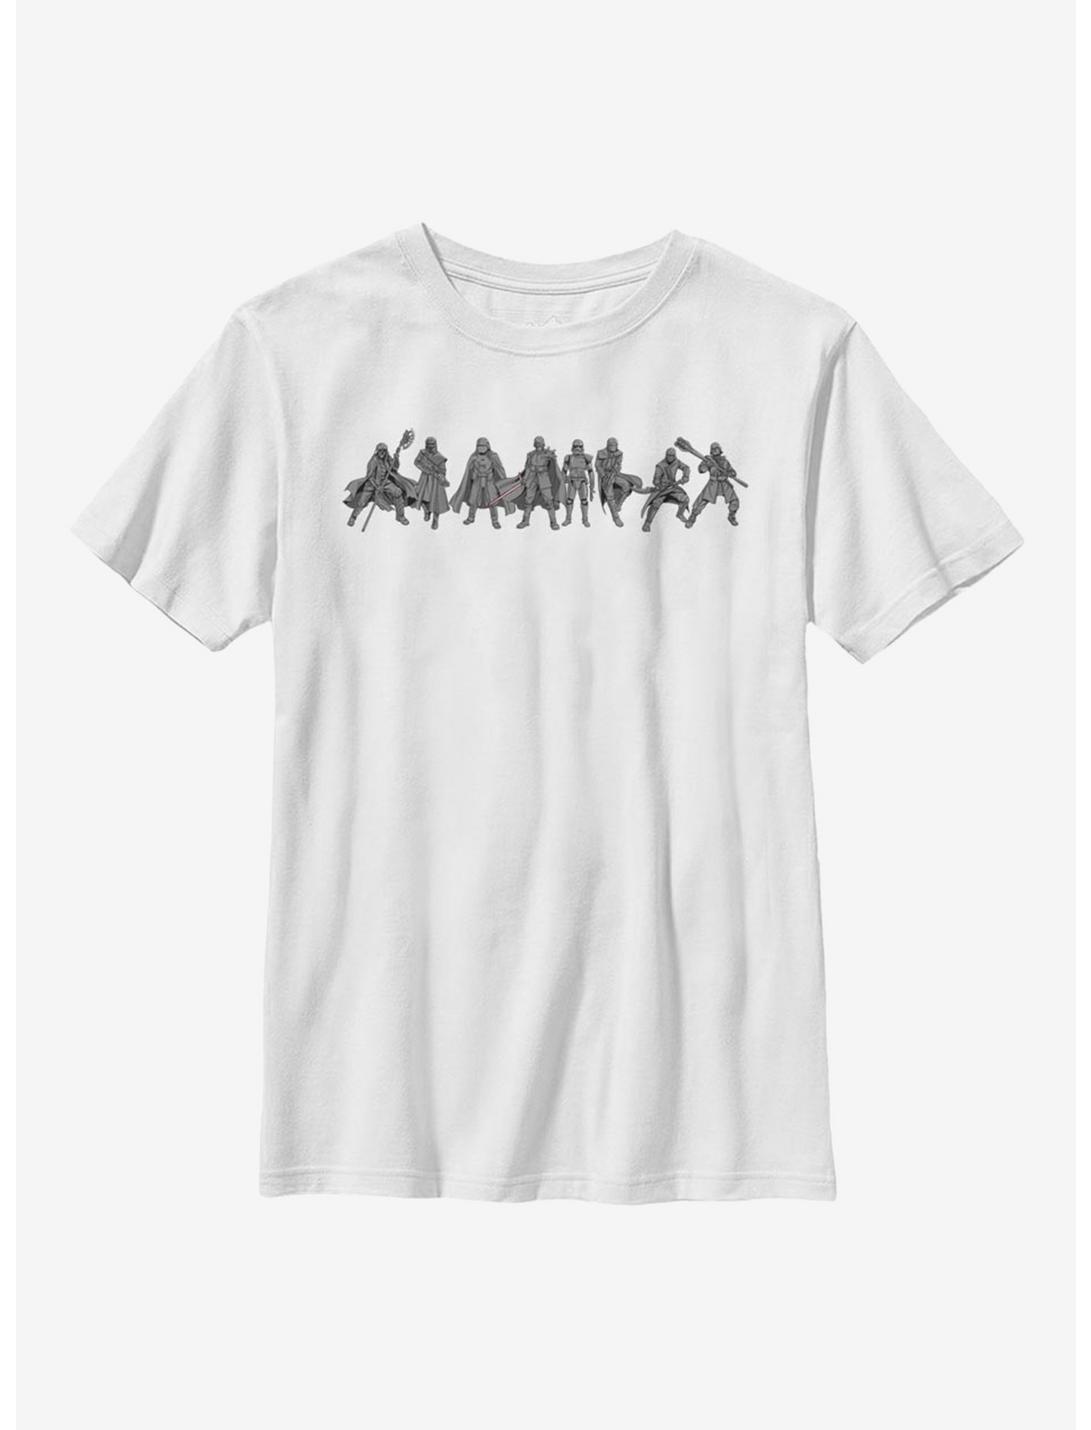 Star Wars Episode IX The Rise Of Skywalker New Order Lineup Youth T-Shirt, WHITE, hi-res